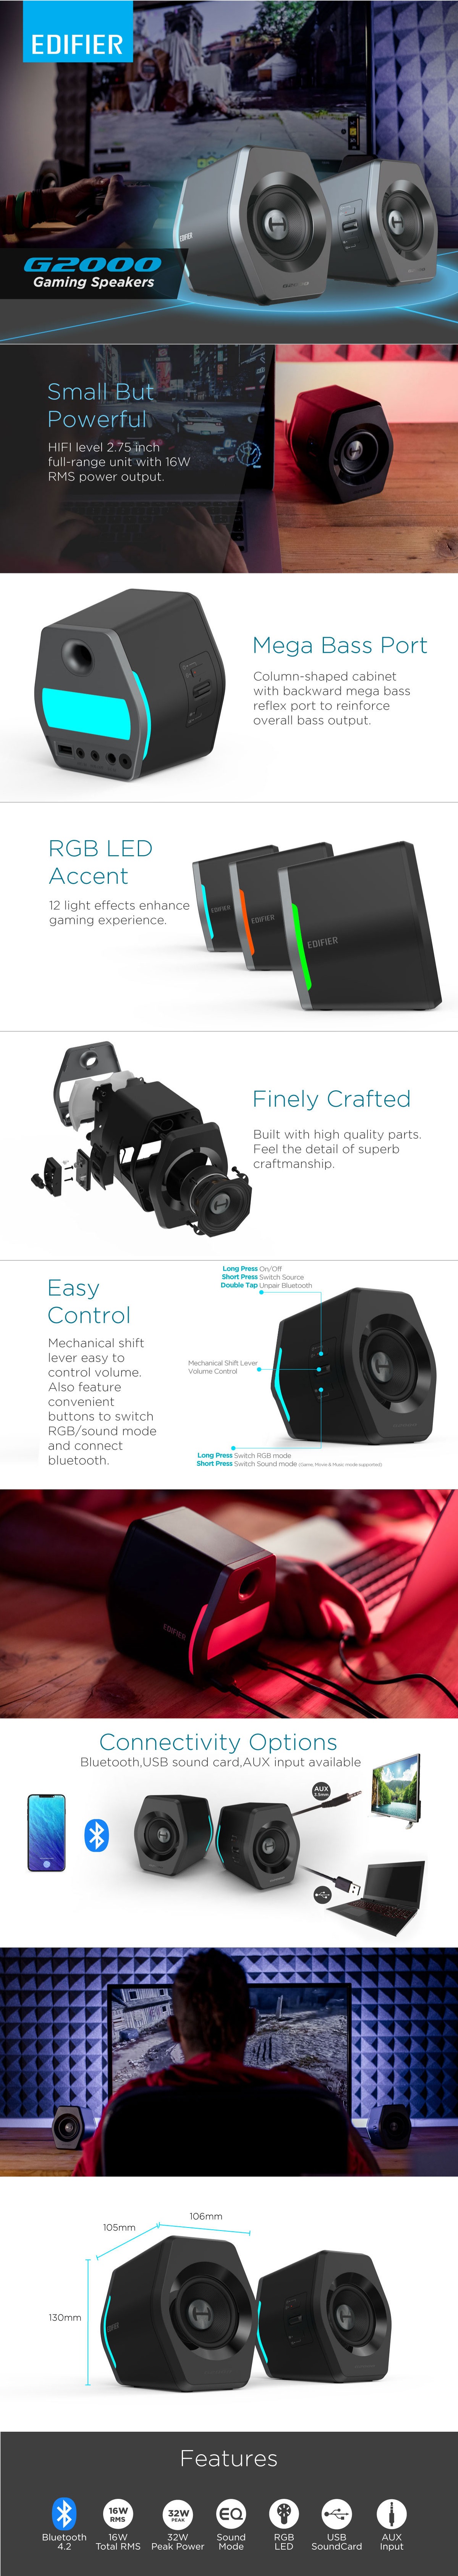 A large marketing image providing additional information about the product Edifier G2000 2.0 Bluetooth Gaming Speakers - White - Additional alt info not provided